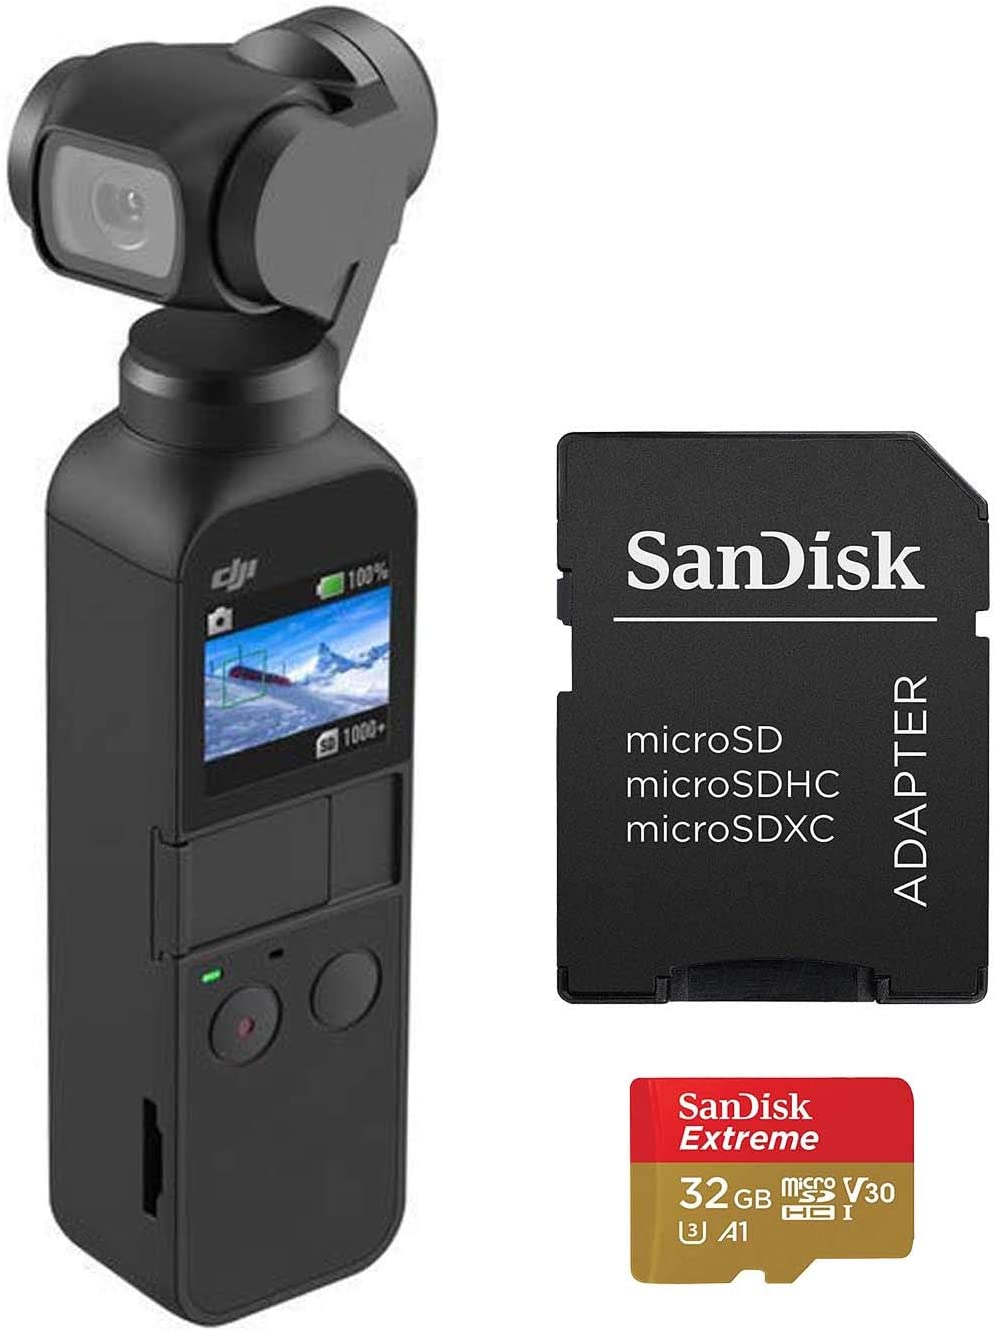 DJI Osmo Pocket Handheld 3 Camera and a Sandisk Extreme 32GB Micro SD card